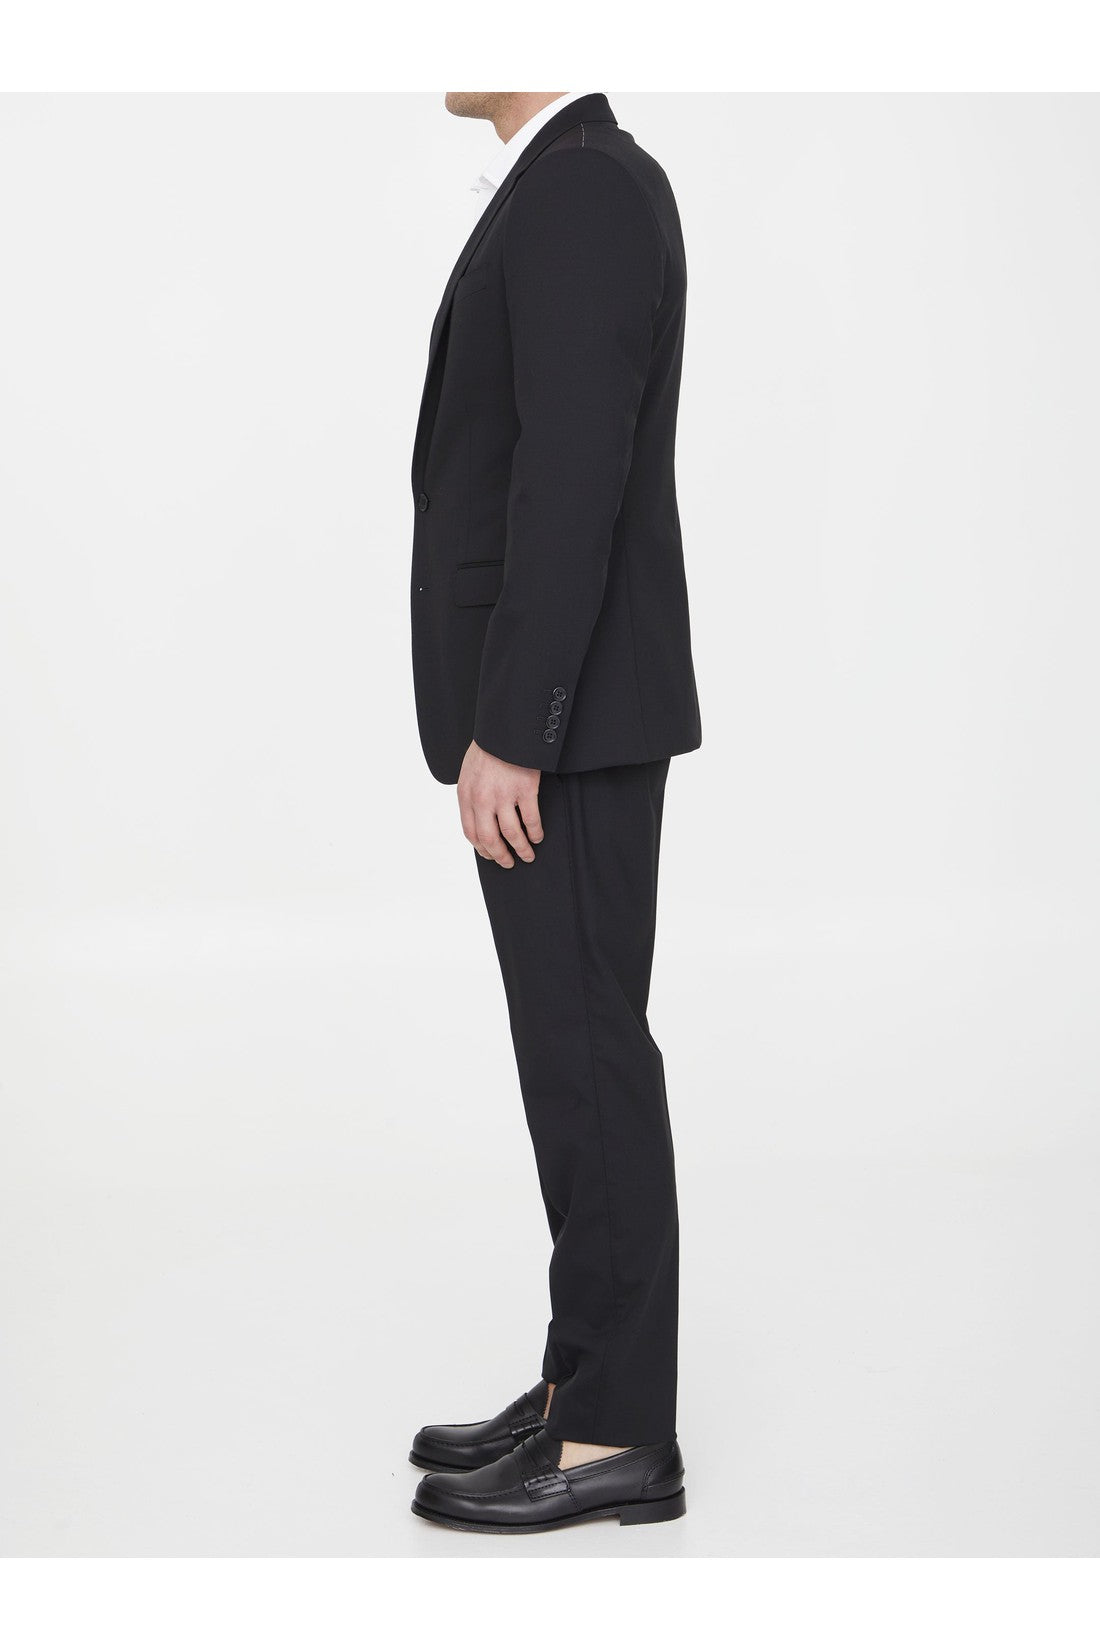 Two-piece suit in black wool